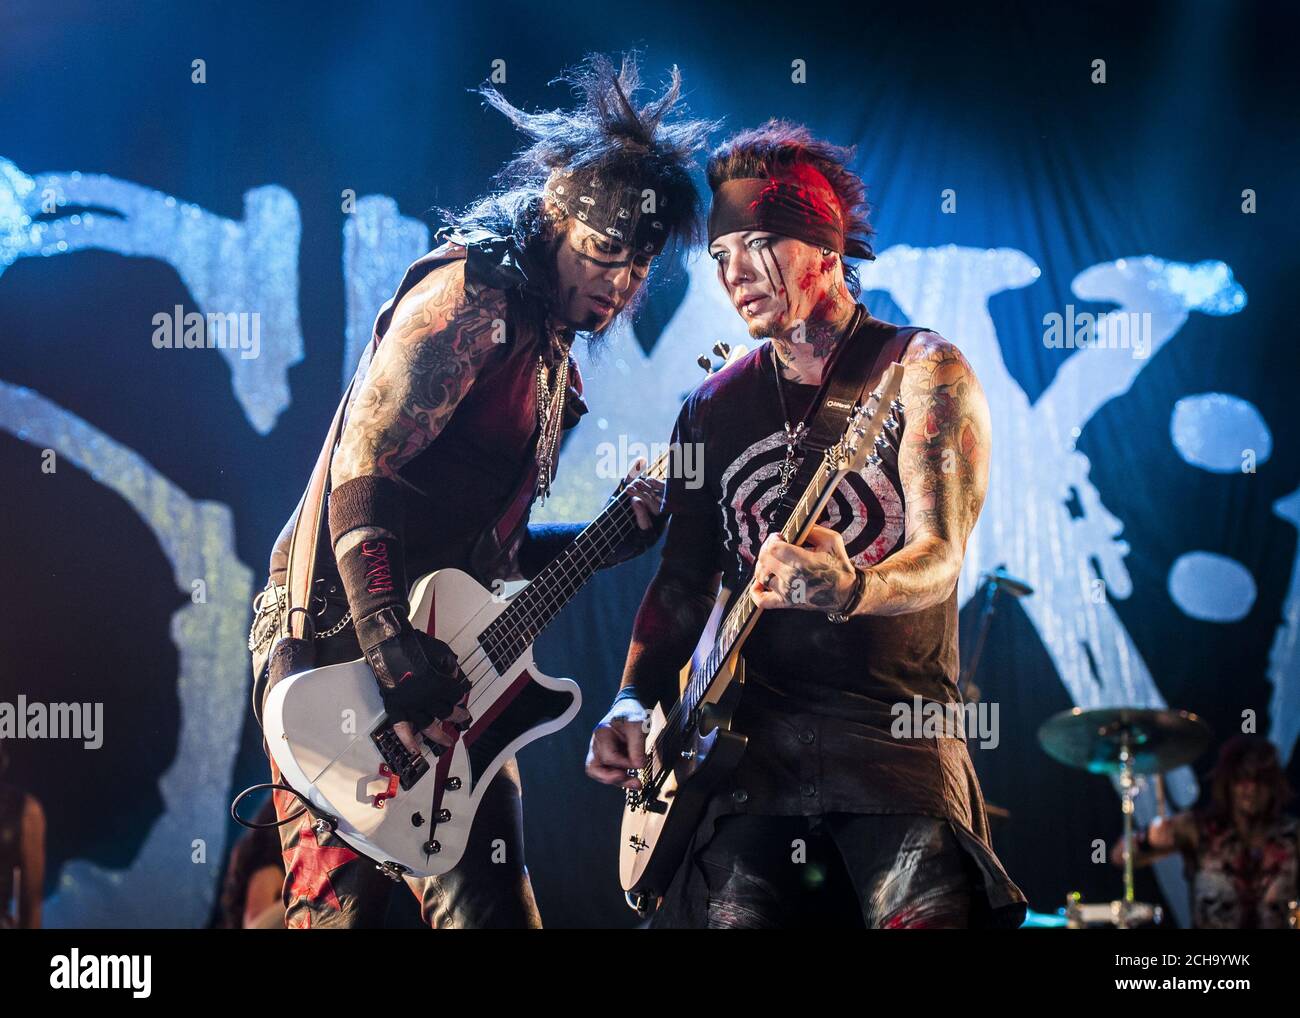 Nikki Sixx And Dj Ashba From Sixx A M Perform Live On Stage At The Isle Of Wight Festival Seaclose Park Newport On The Isle Of Wight Stock Photo Alamy